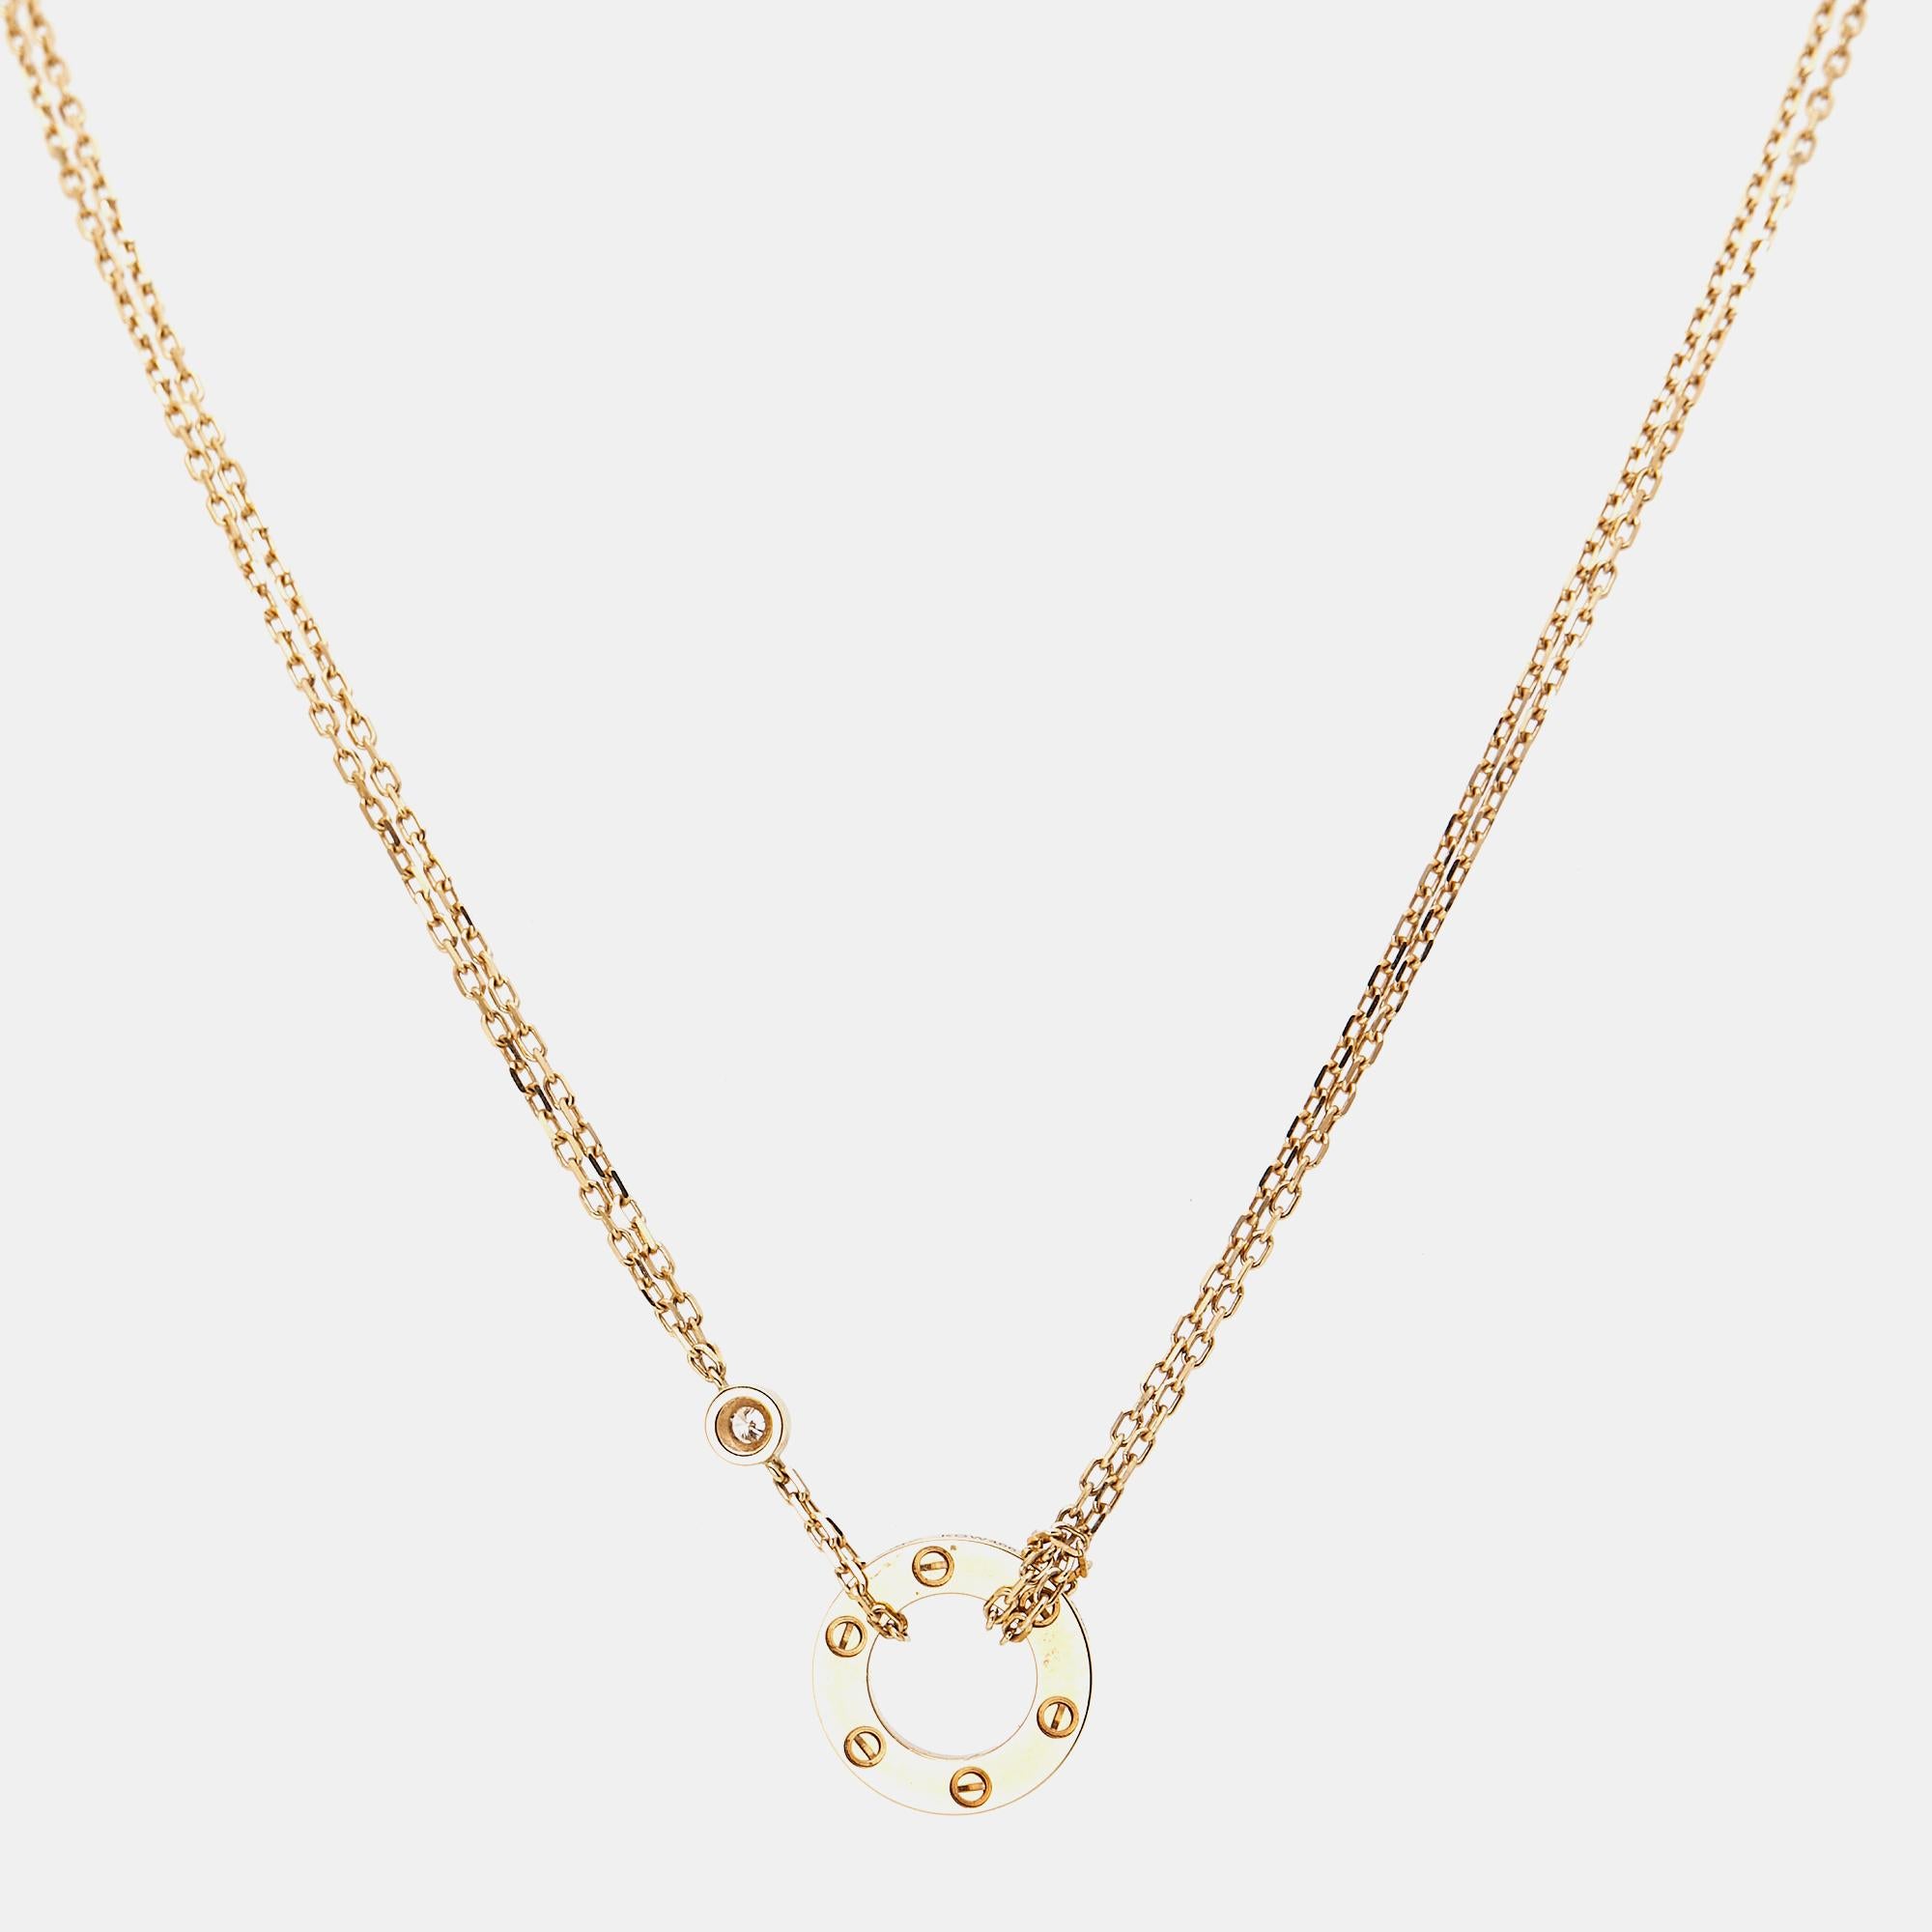 This Love necklace is a testament to the wondrous craftsmanship and the painstaking effort that goes into making a Cartier wonder! Crafted from 18K yellow gold, the necklace flaunts the iconic screw motifs, brilliant-cut diamonds, and double chains